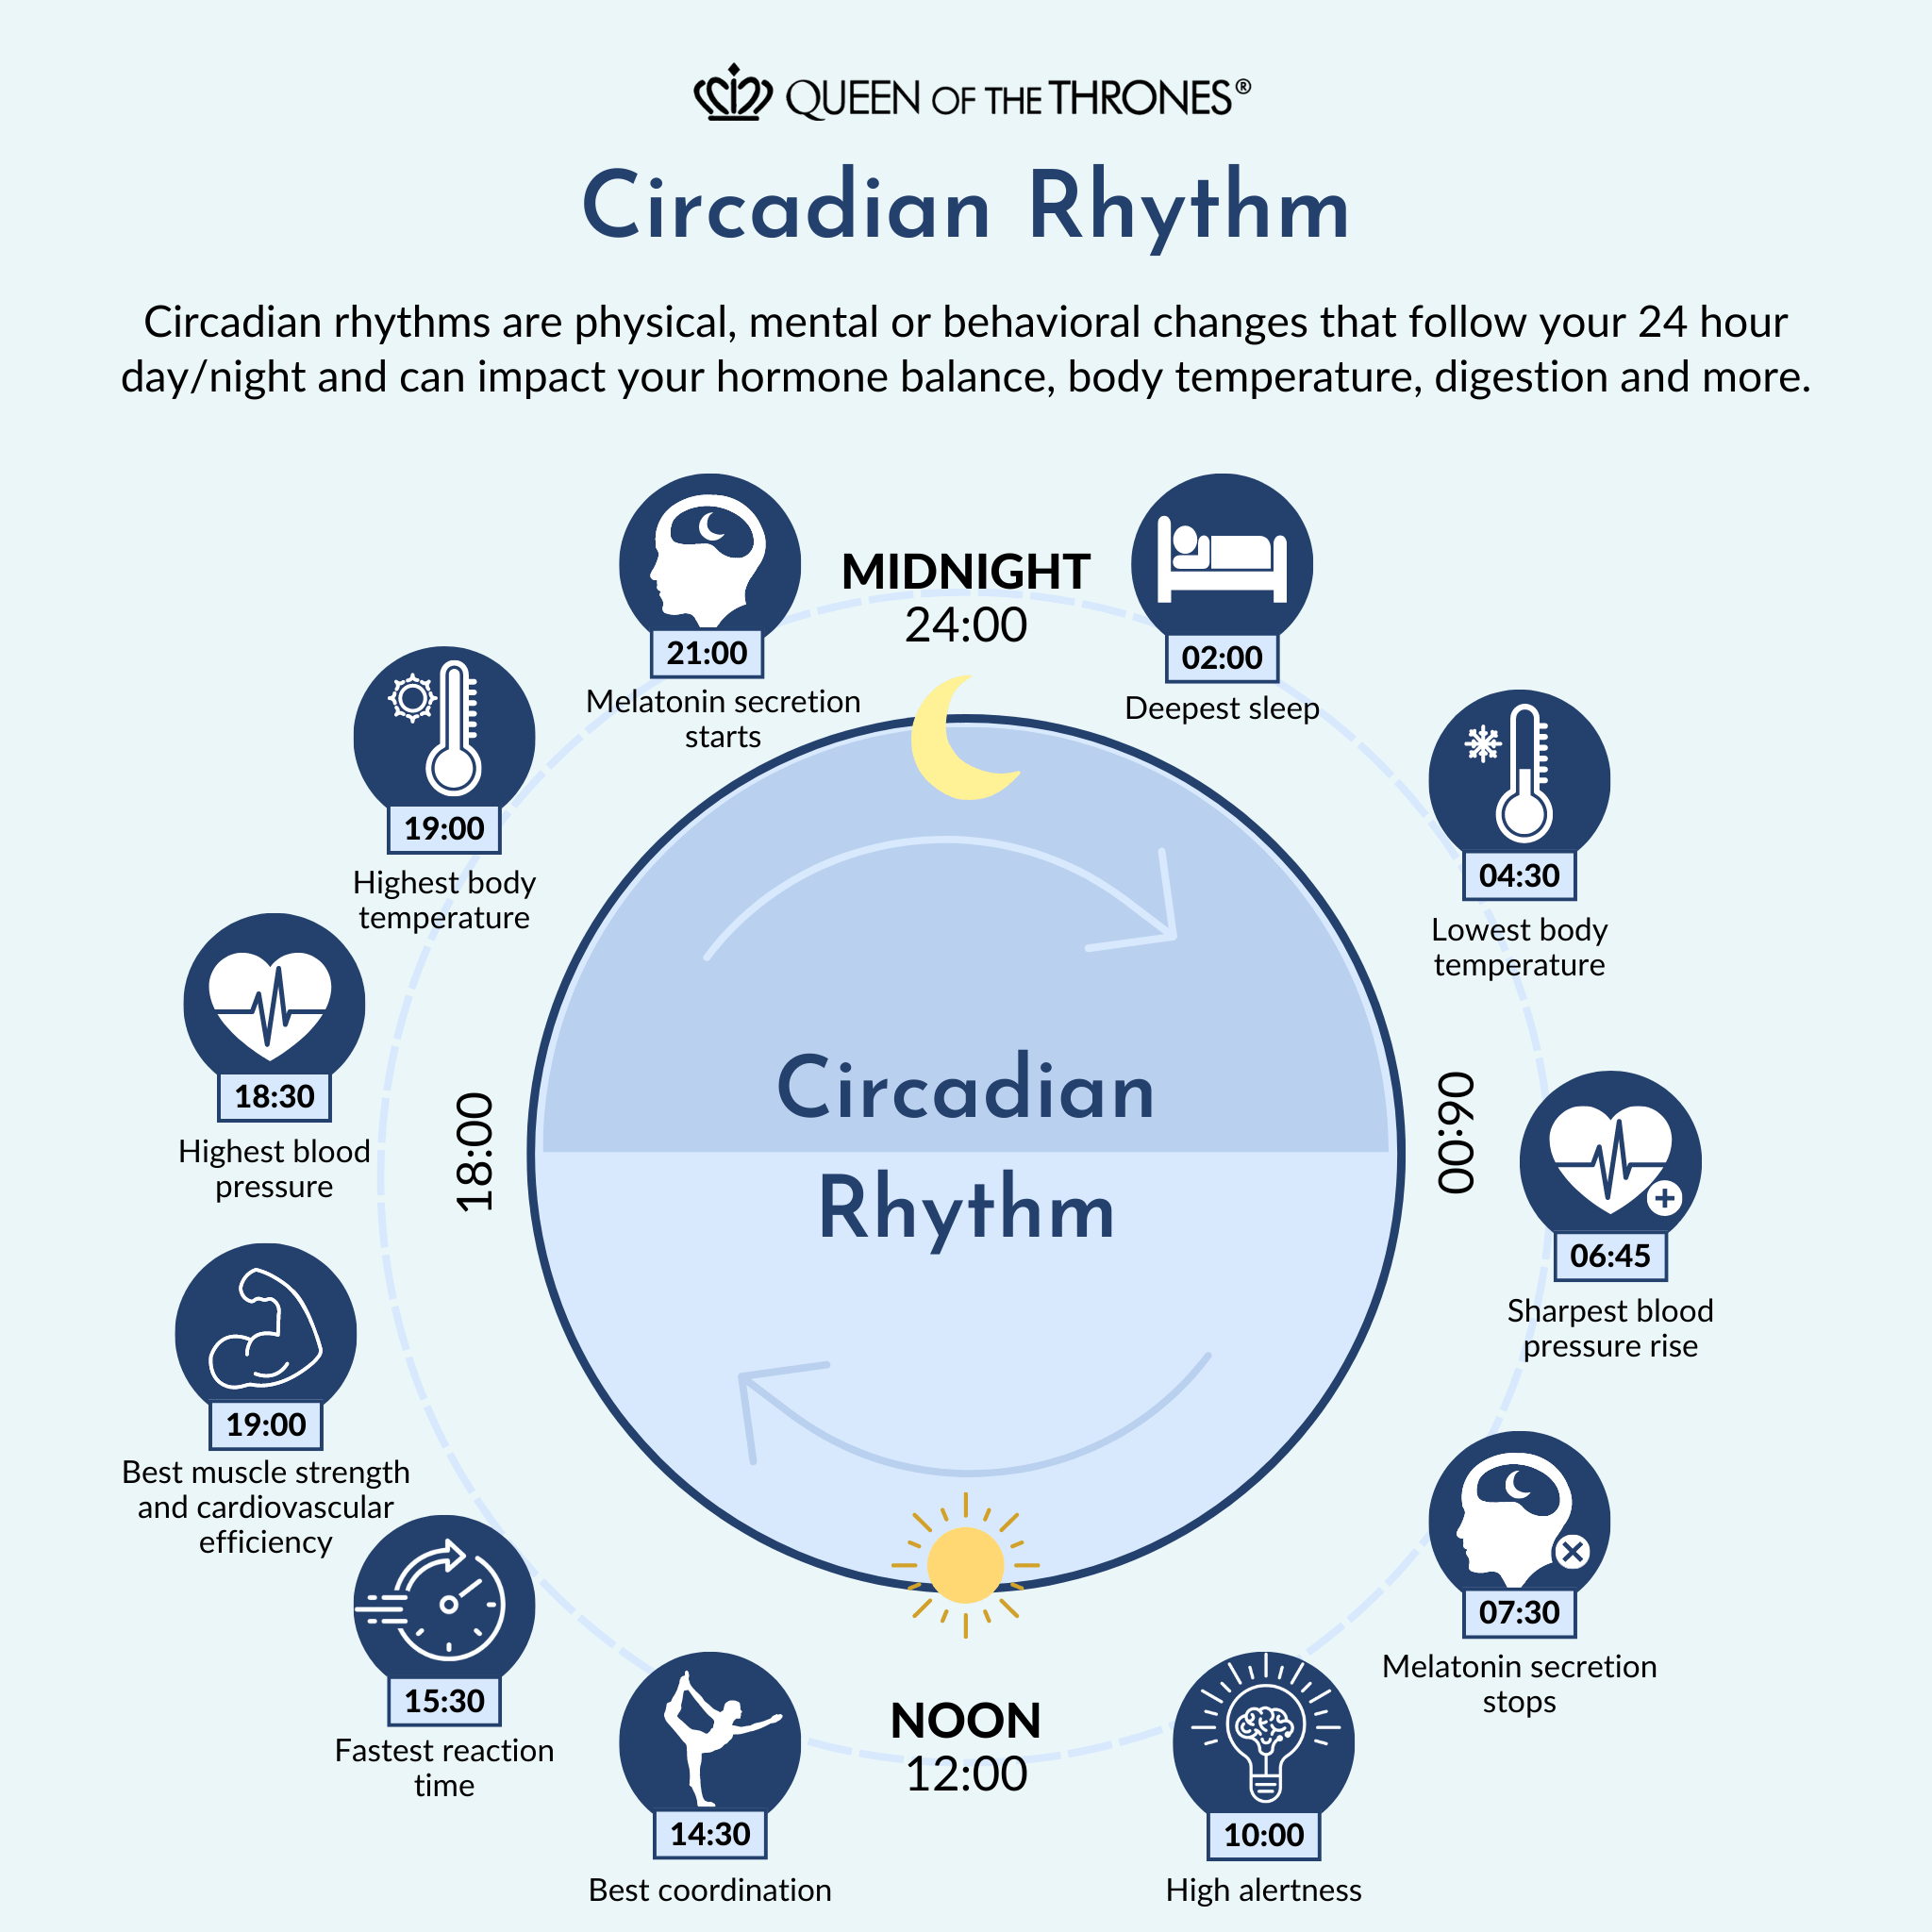 Circadian Rhythm by Queen of the Thrones